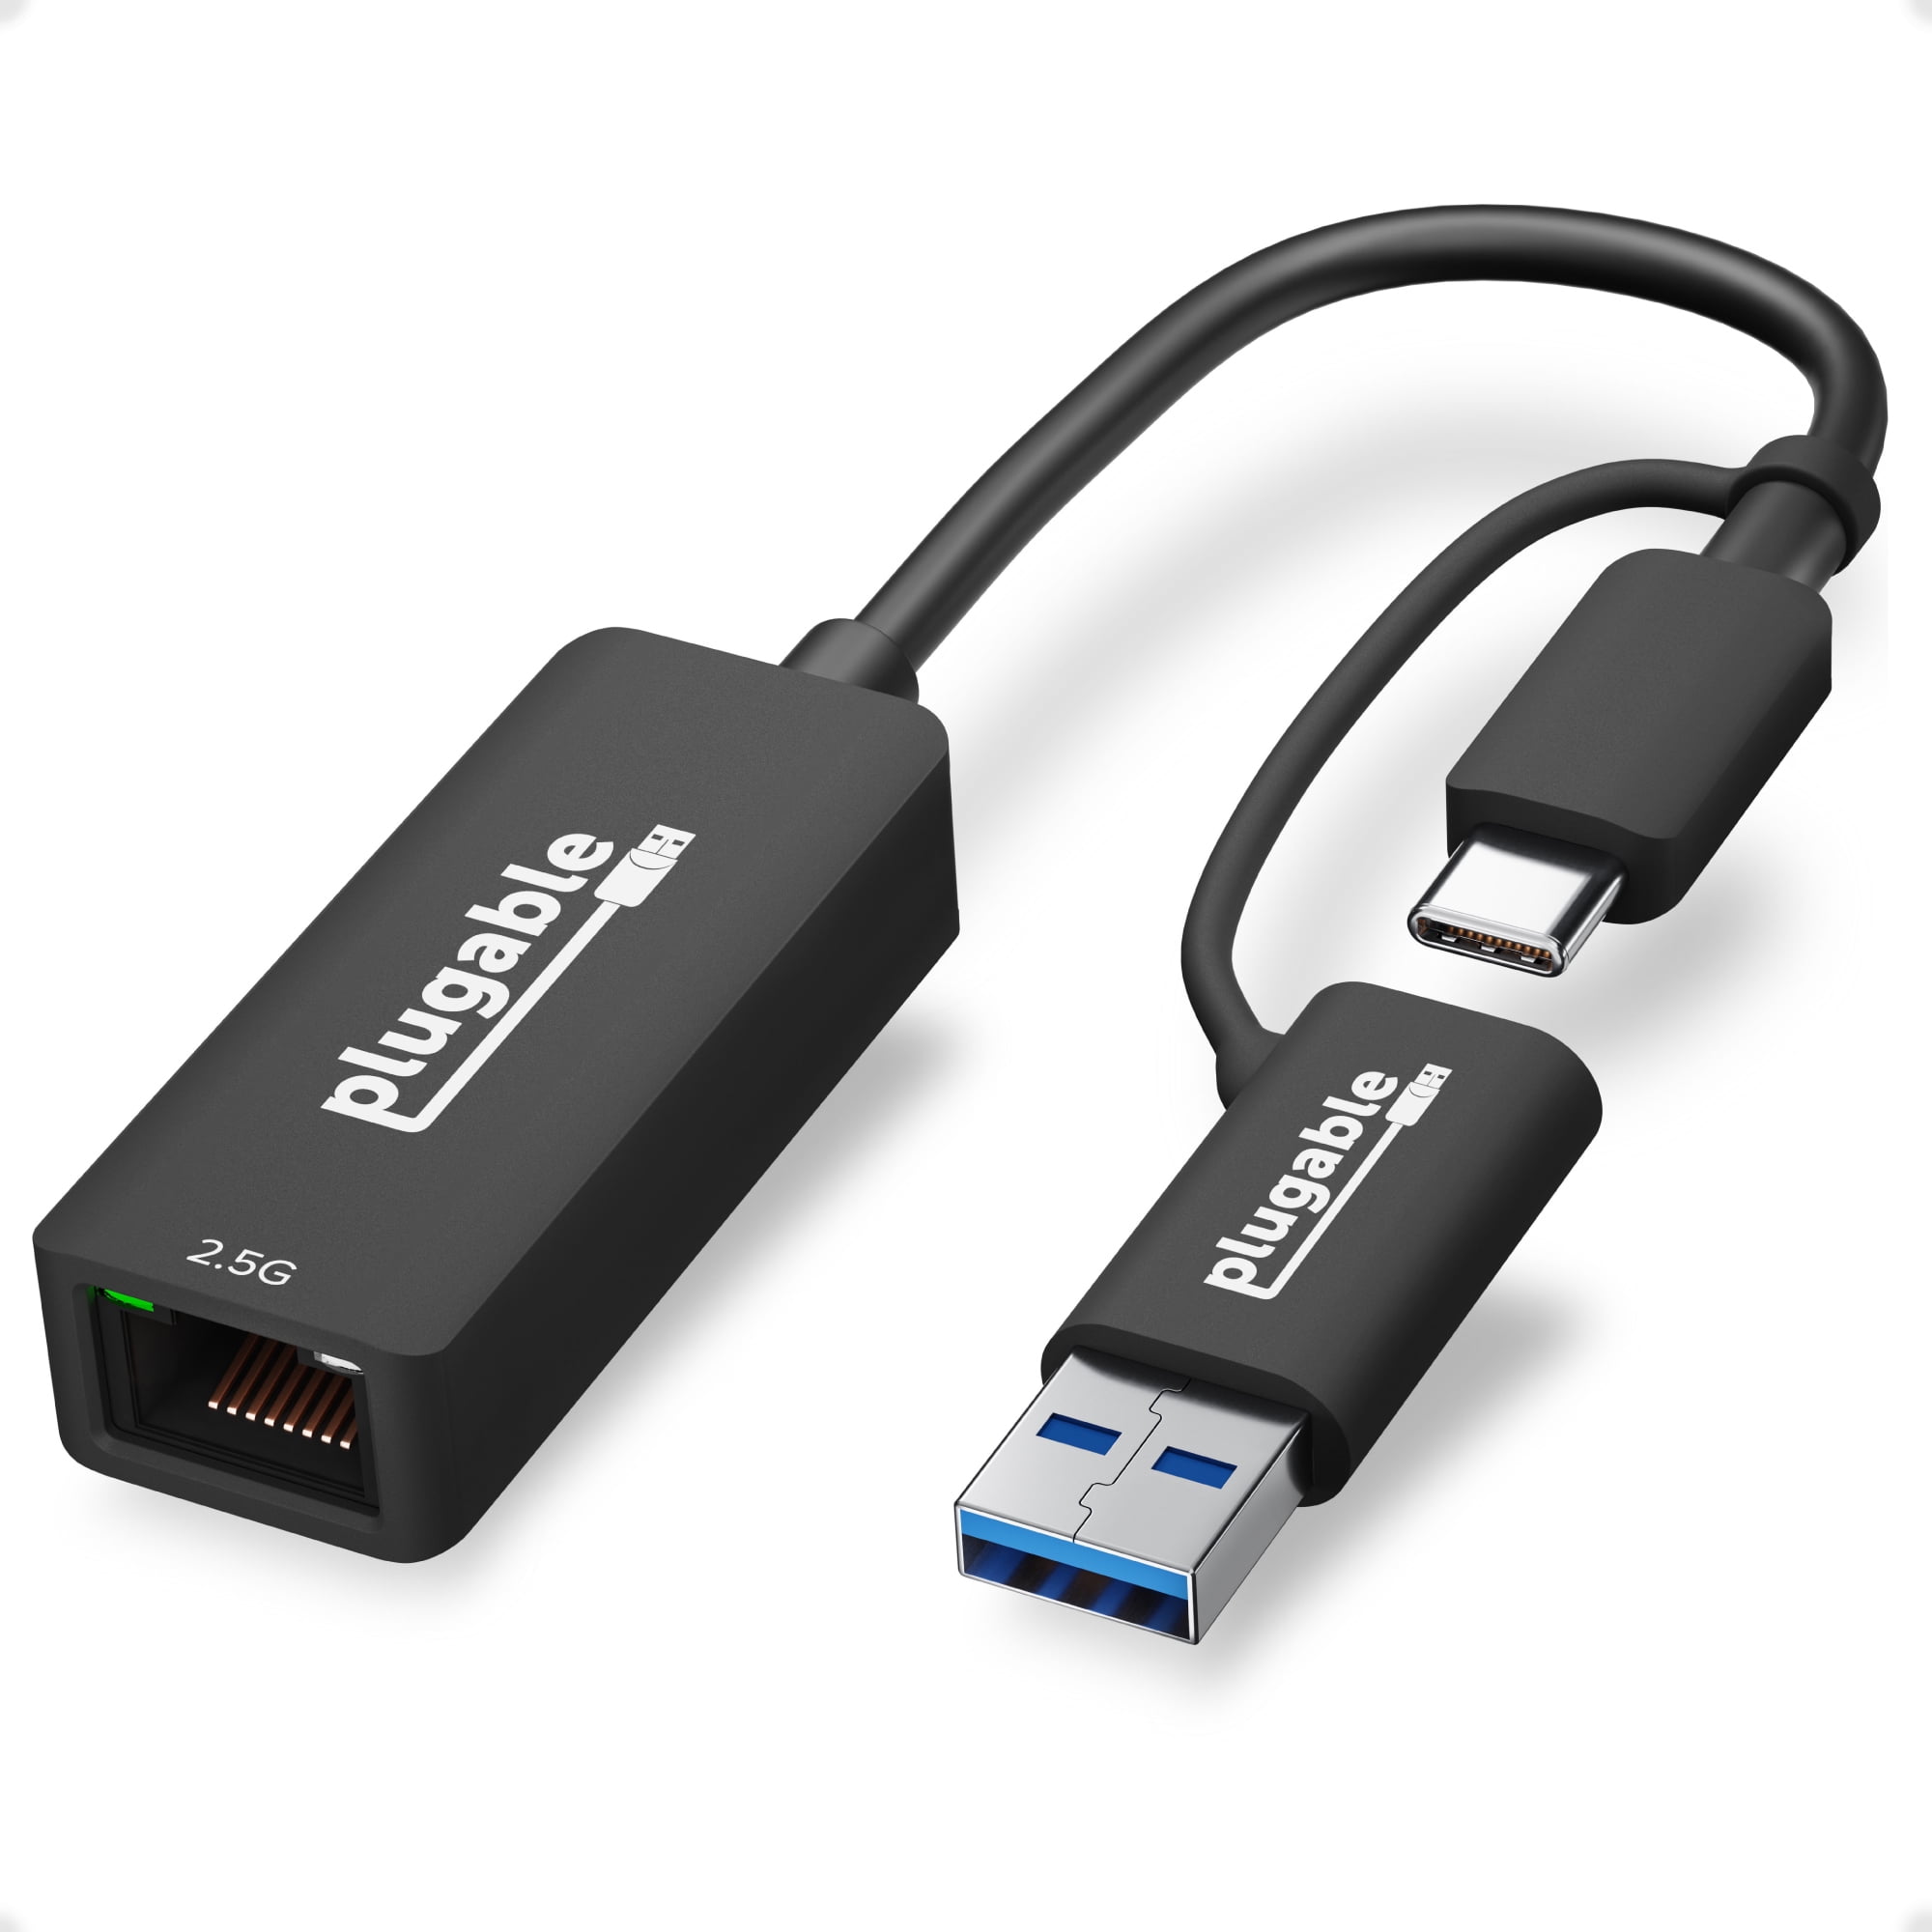 Plugable 2.5G USB C and USB to Ethernet Adapter, 2-in-1 Adapter Compatible with USB-C Thunderbolt 3 or USB 3.0, USB-C to RJ45 2.5 LAN Ethernet, Compatible Mac and Windows -